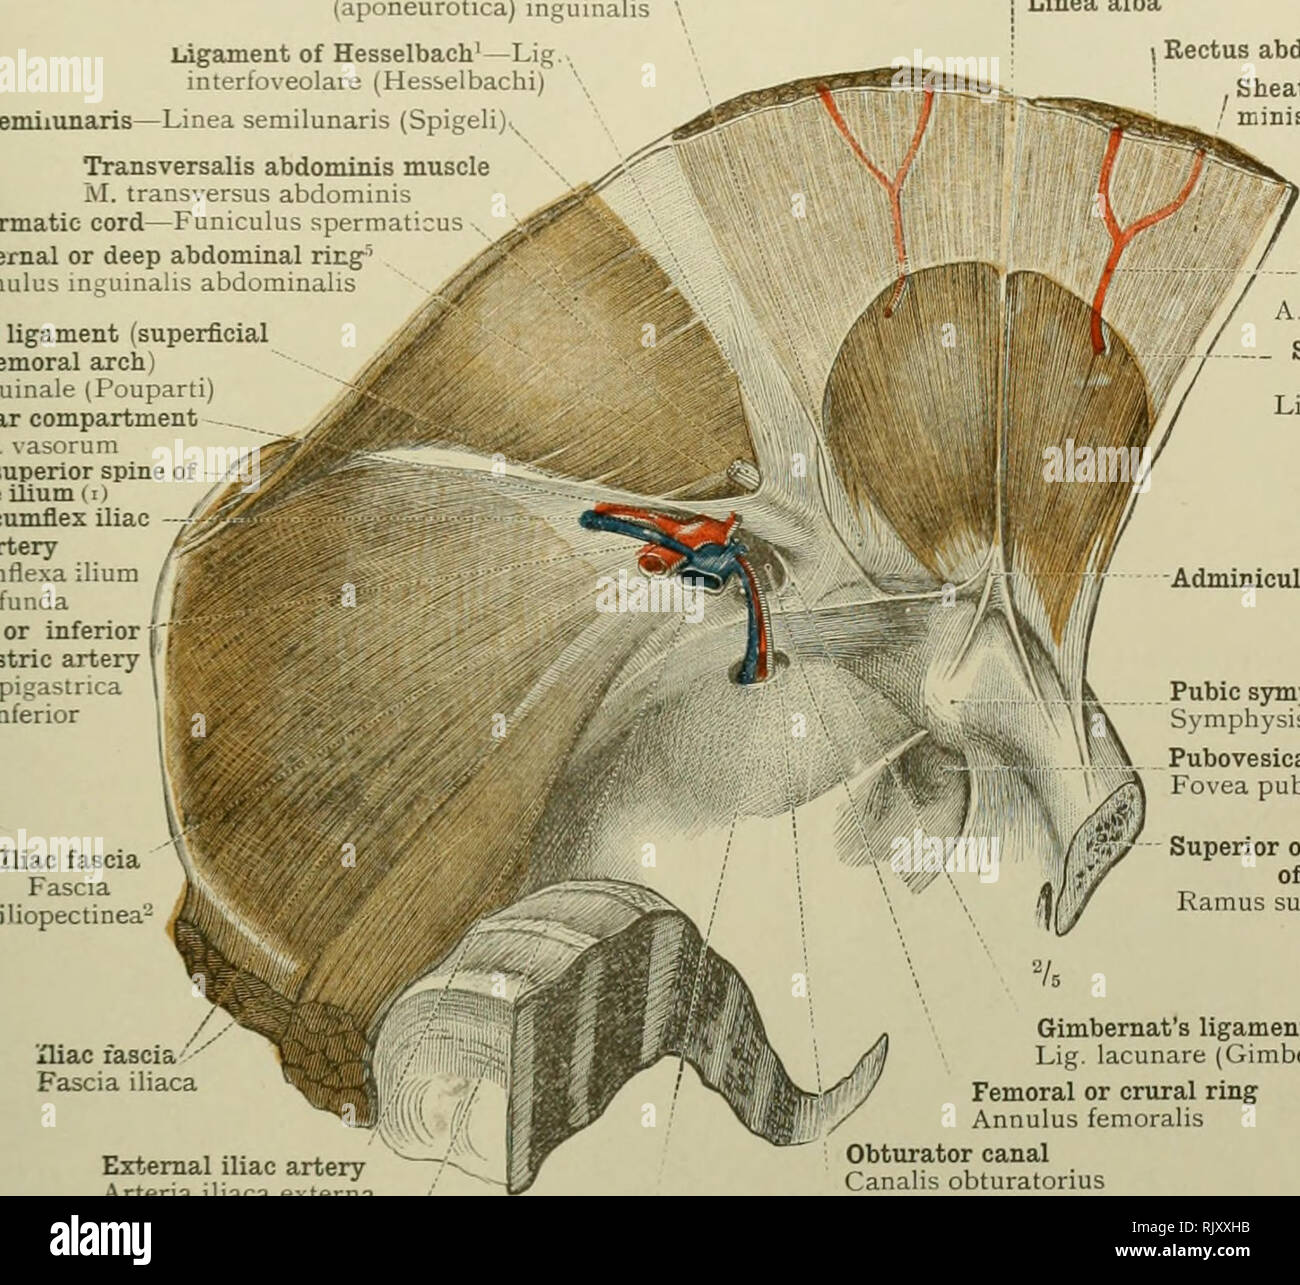 An atlas of human anatomy for students and physicians. Anatomy. INGUINAL  CANAL AND FEMORAL CANAL 389 Ligament of Henle'—Falx (aponeurotica)  inguinalis Llnea semilunaris- Ligament of Hesselbach'—Lig interfoveolare  (Hesselbachi) -Linea semilunaris (Spigel:.